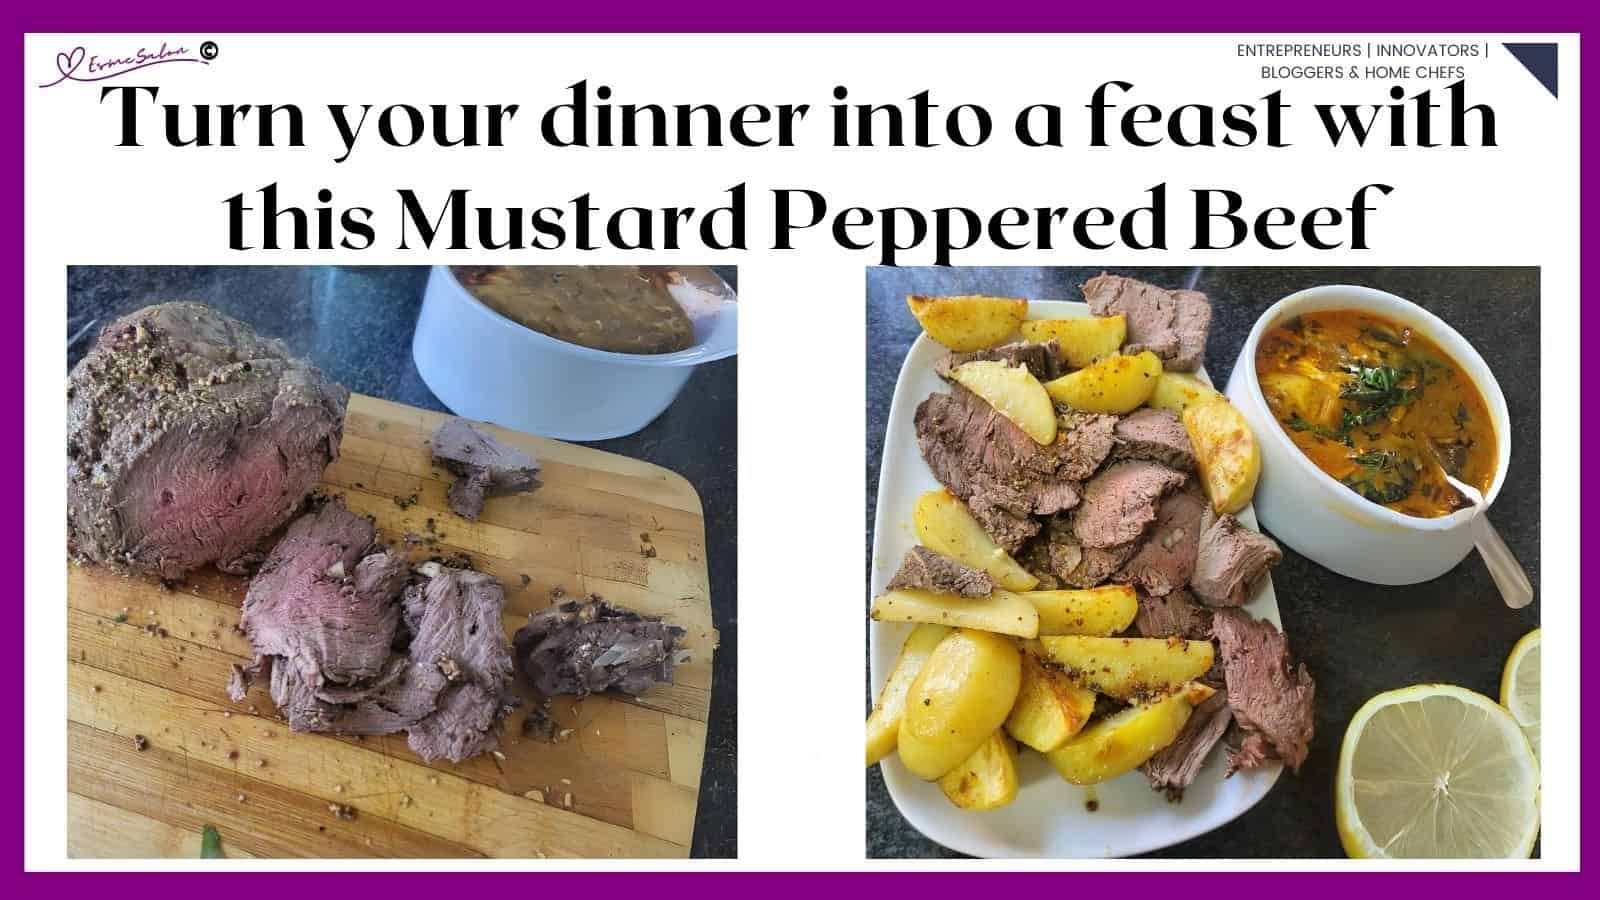 an image of Mustard Peppered Beef on a white platter with baked potato wedges